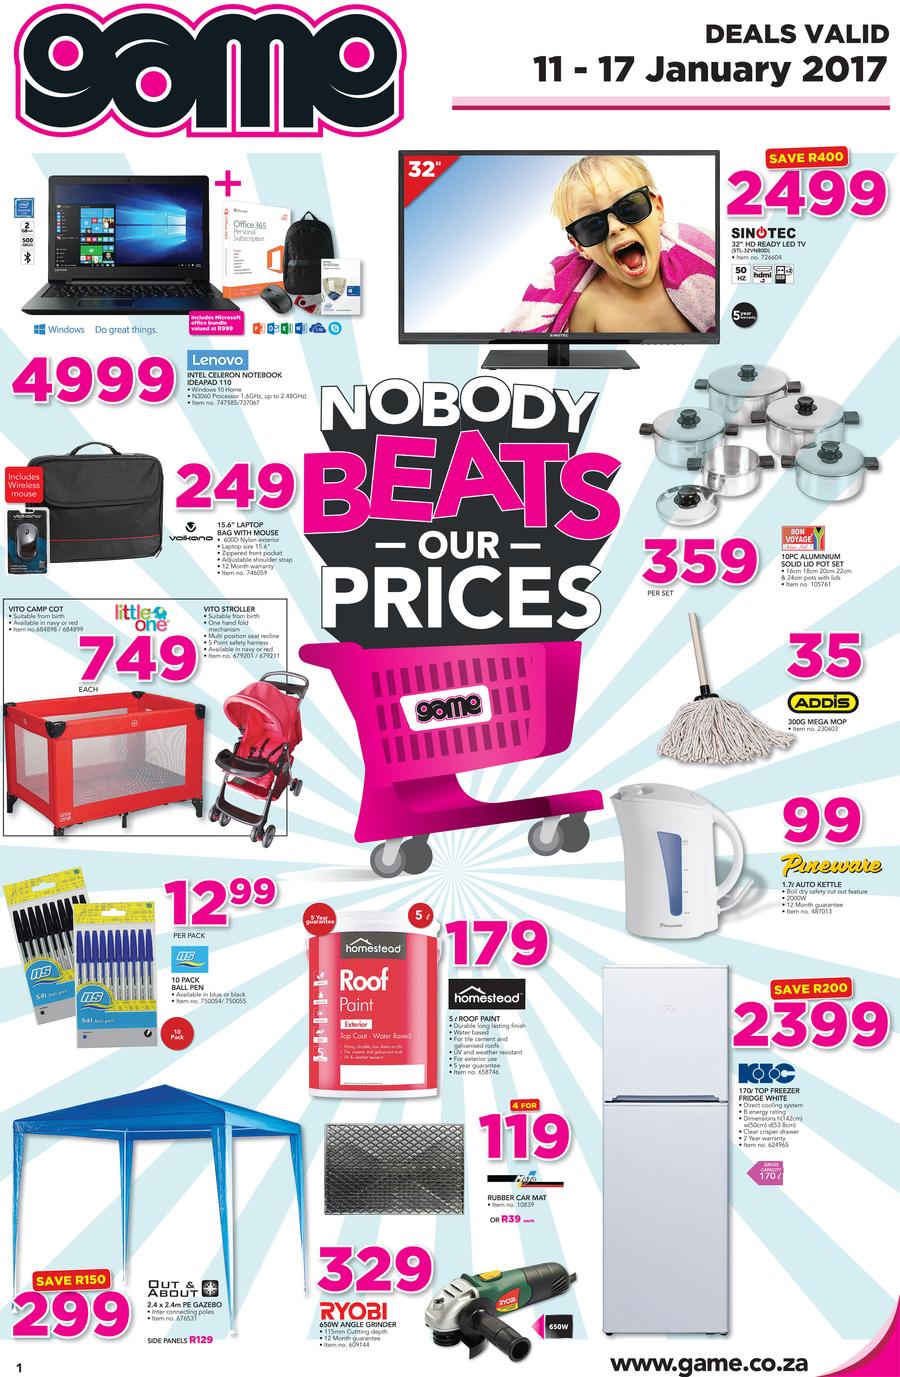 Game JHB : Nobody Beats Our Prices